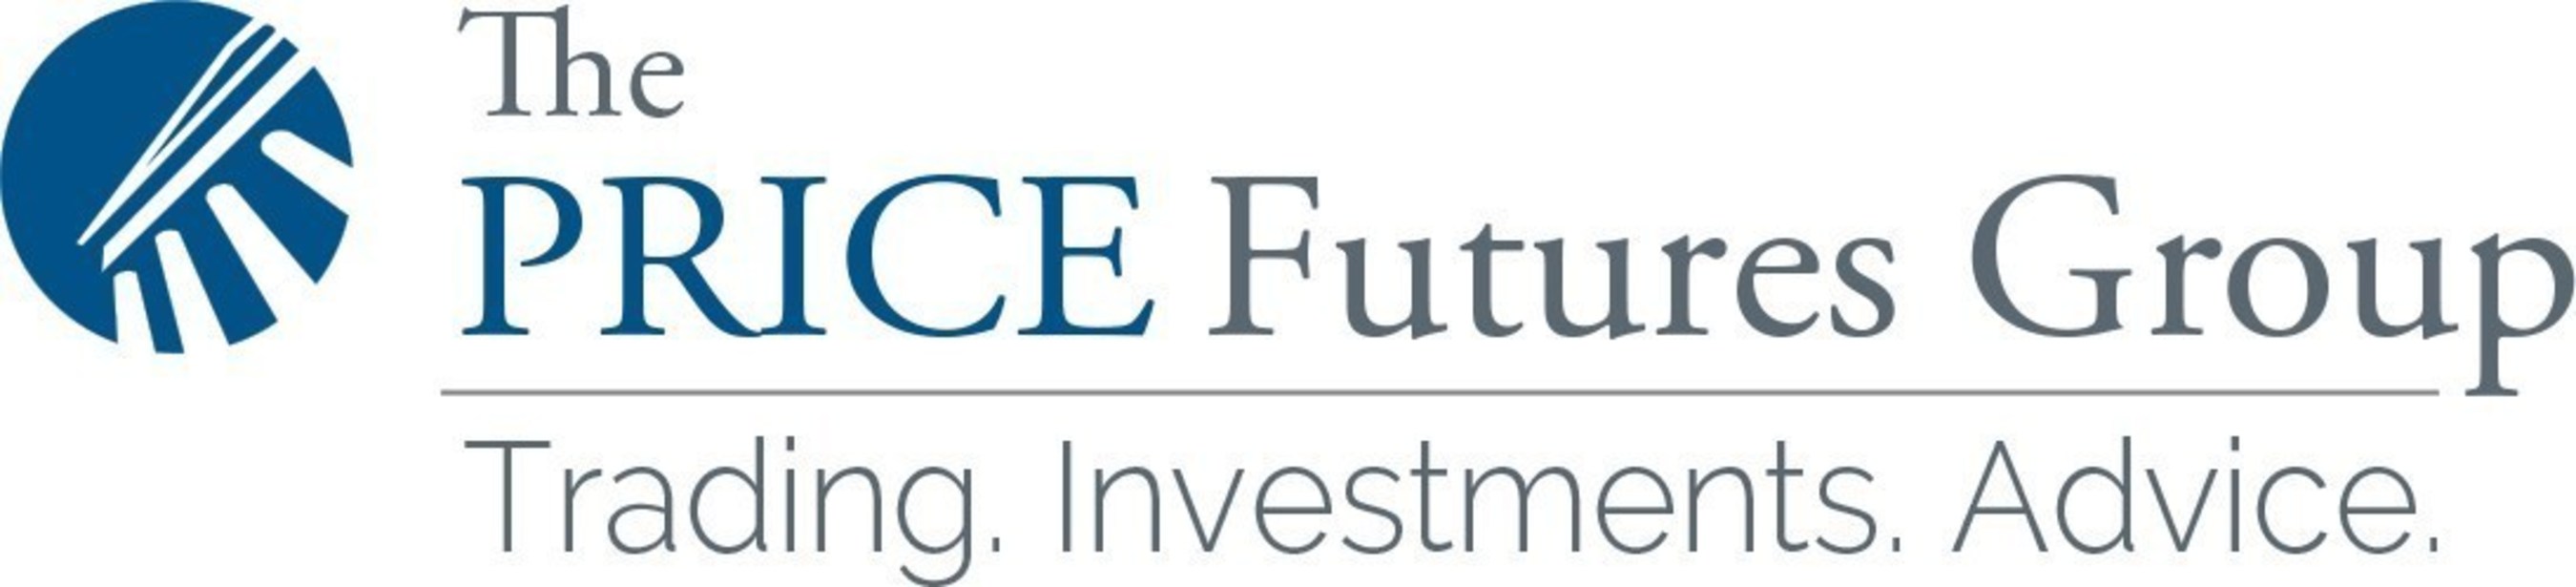 The PRICE Futures Group provides an array of full service brokerage, trading, asset management, and financial consulting services to clients not only throughout the United States, but also South America, Canada, Asia/Pacific, Europe, and the Middle East.